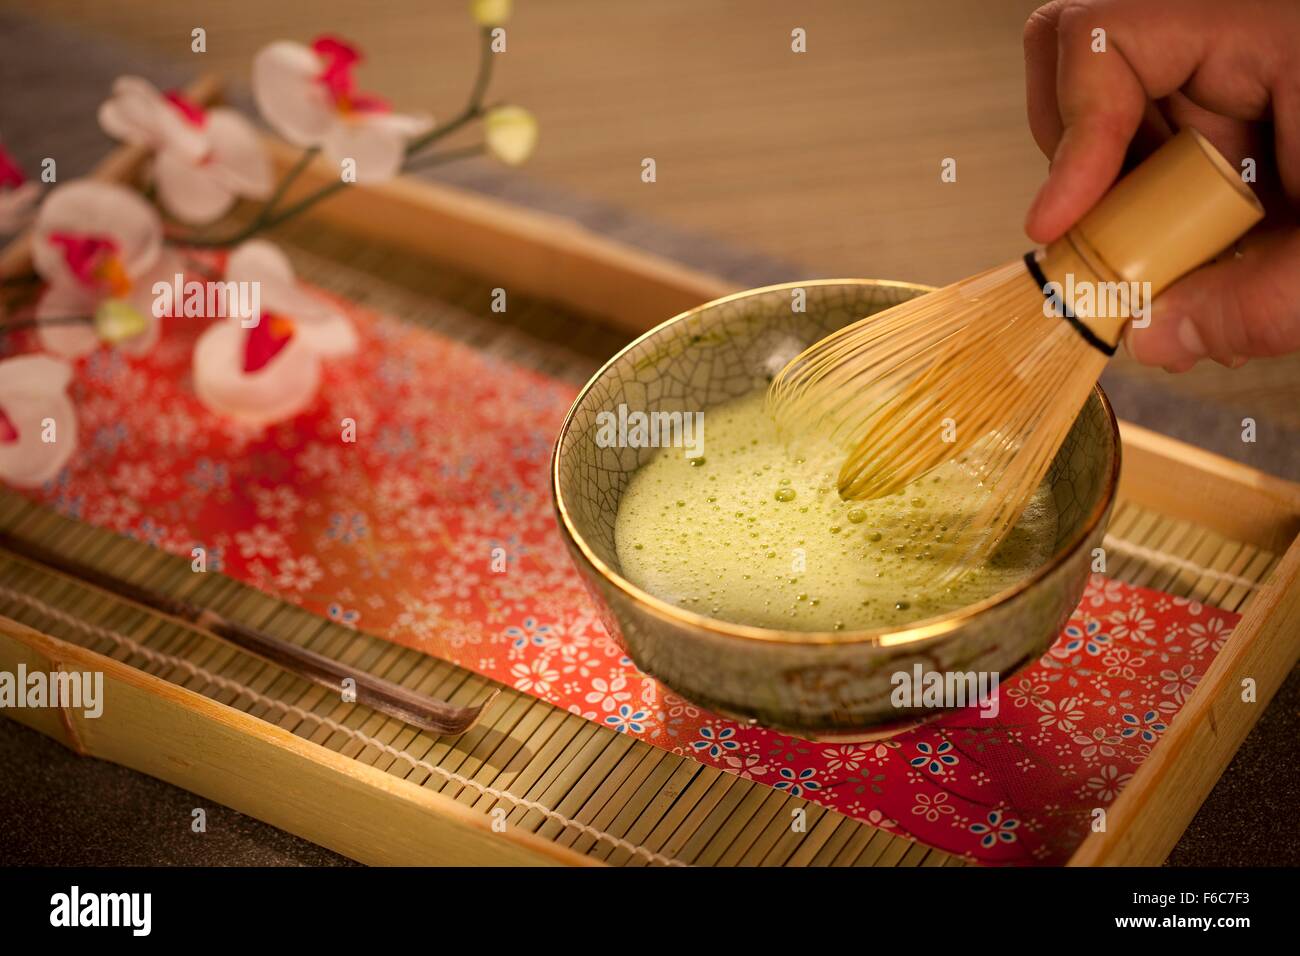 Mixing Japanese Matcha Green Tea in a Ceremonial Bowl with Whisk Stock Photo